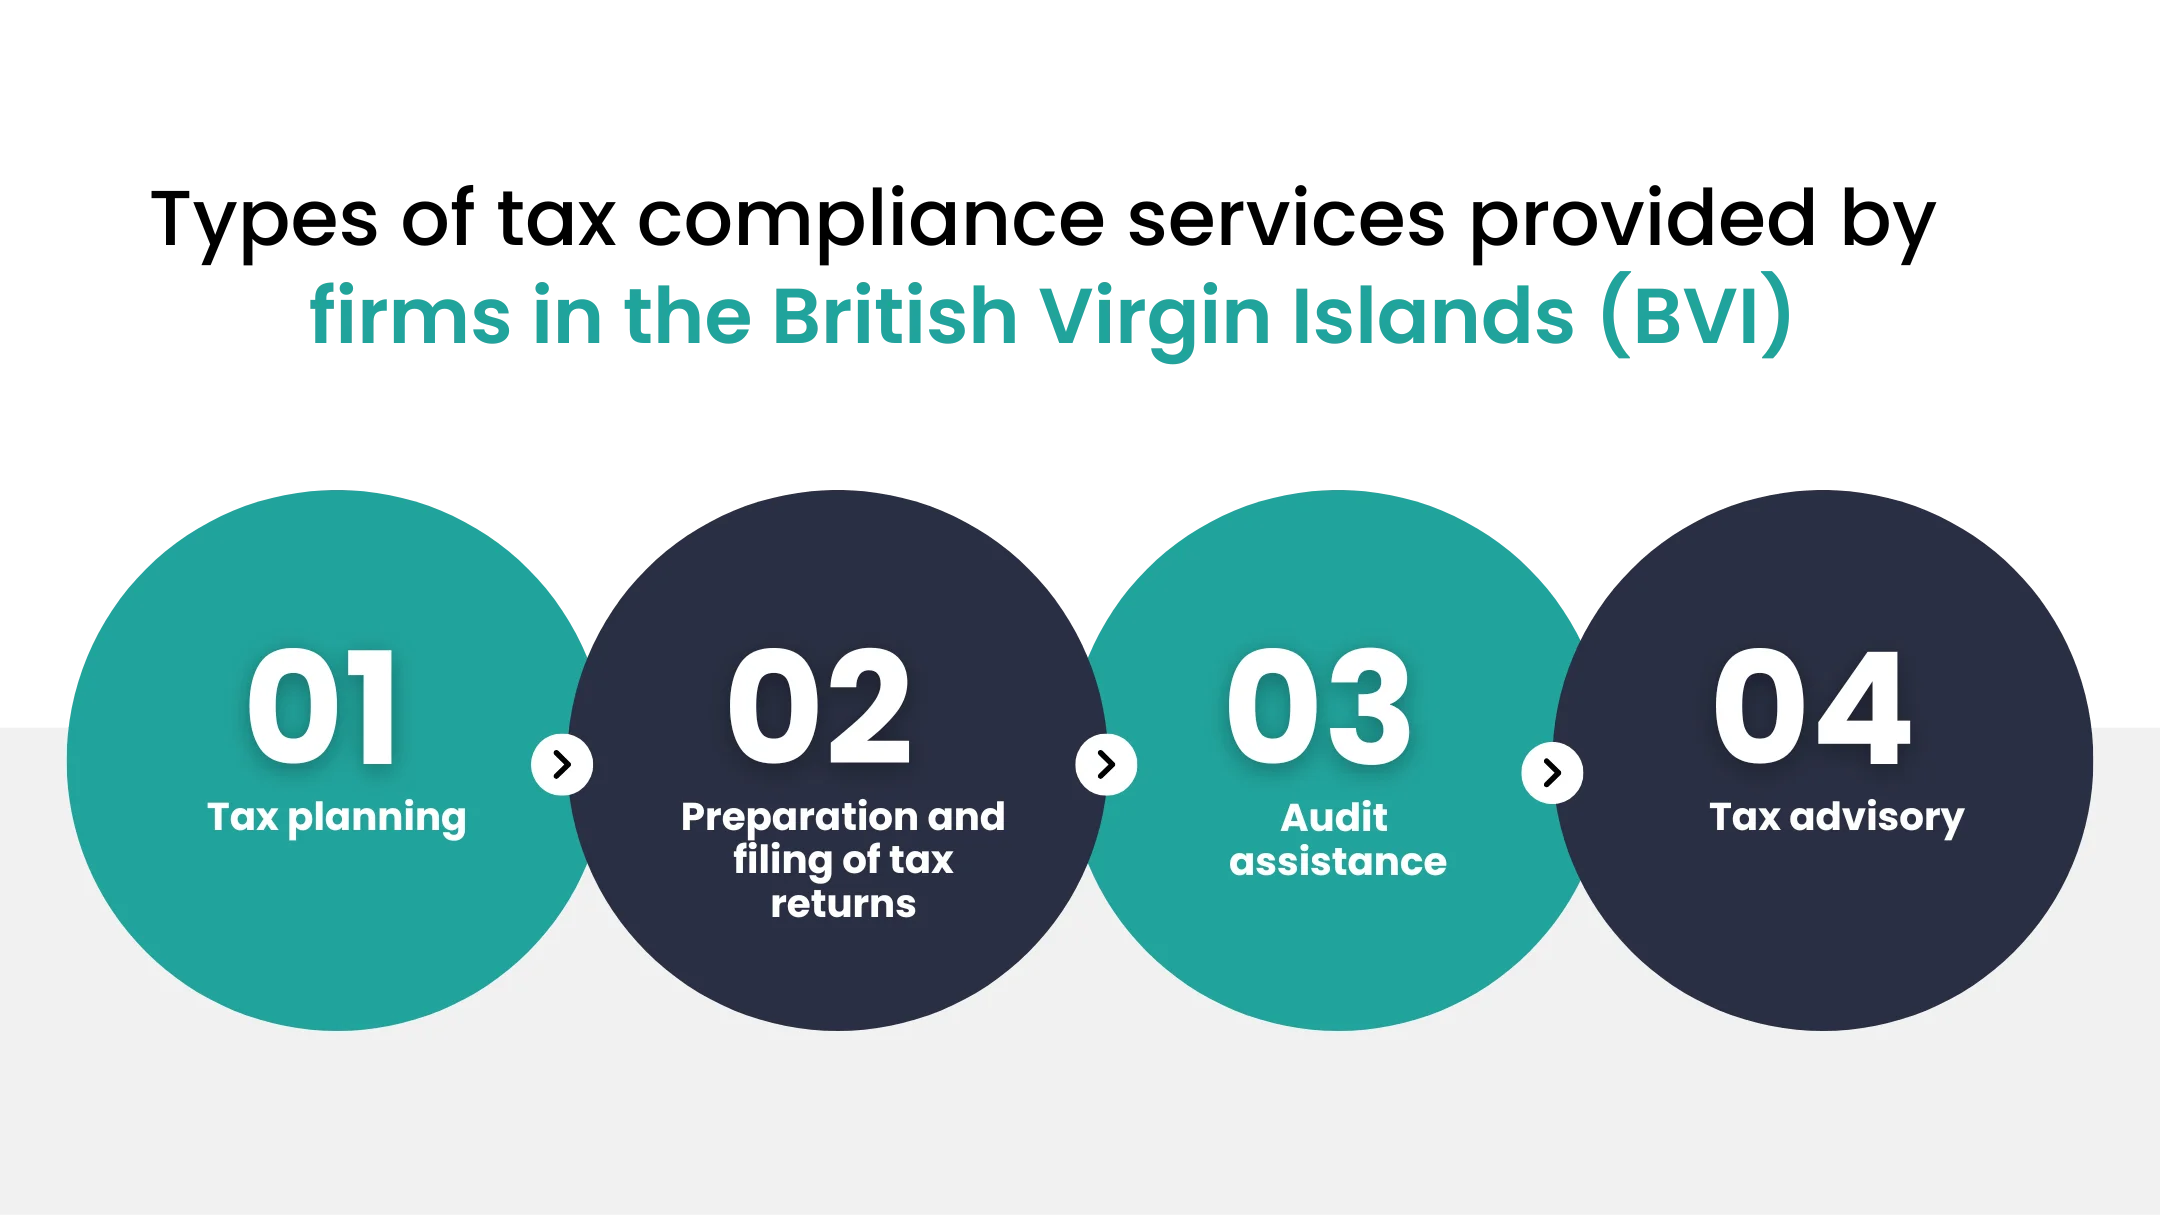 types of tax compliance services provided by firms in the british virgin islands